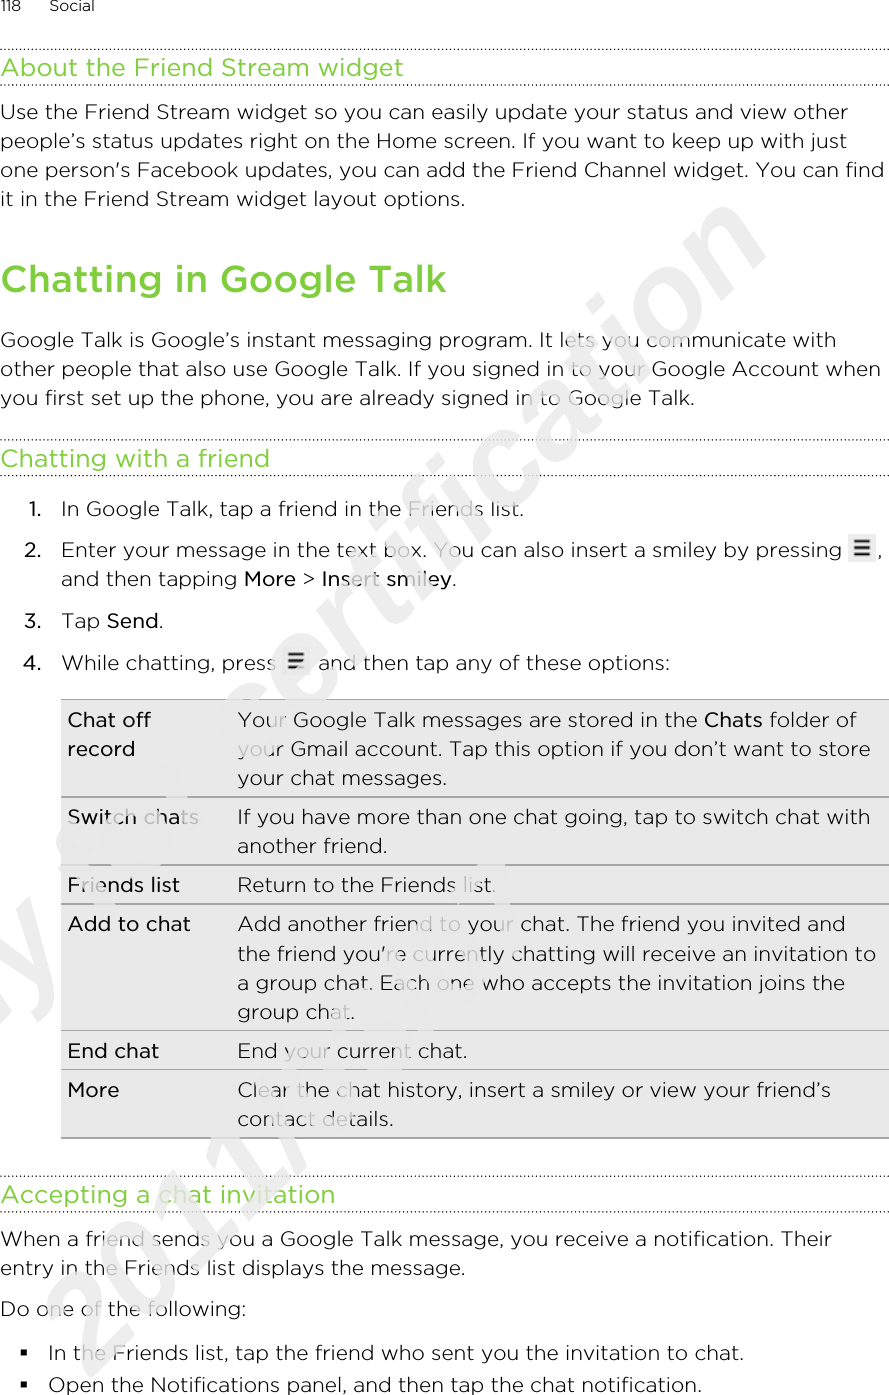 About the Friend Stream widgetUse the Friend Stream widget so you can easily update your status and view otherpeople’s status updates right on the Home screen. If you want to keep up with justone person&apos;s Facebook updates, you can add the Friend Channel widget. You can findit in the Friend Stream widget layout options.Chatting in Google TalkGoogle Talk is Google’s instant messaging program. It lets you communicate withother people that also use Google Talk. If you signed in to your Google Account whenyou first set up the phone, you are already signed in to Google Talk.Chatting with a friend1. In Google Talk, tap a friend in the Friends list.2. Enter your message in the text box. You can also insert a smiley by pressing  ,and then tapping More &gt; Insert smiley.3. Tap Send.4. While chatting, press   and then tap any of these options:Chat offrecordYour Google Talk messages are stored in the Chats folder ofyour Gmail account. Tap this option if you don’t want to storeyour chat messages.Switch chats If you have more than one chat going, tap to switch chat withanother friend.Friends list Return to the Friends list.Add to chat Add another friend to your chat. The friend you invited andthe friend you&apos;re currently chatting will receive an invitation toa group chat. Each one who accepts the invitation joins thegroup chat.End chat End your current chat.More Clear the chat history, insert a smiley or view your friend’scontact details.Accepting a chat invitationWhen a friend sends you a Google Talk message, you receive a notification. Theirentry in the Friends list displays the message.Do one of the following:§In the Friends list, tap the friend who sent you the invitation to chat.§Open the Notifications panel, and then tap the chat notification.118 SocialOnly for certification  2011/03/07